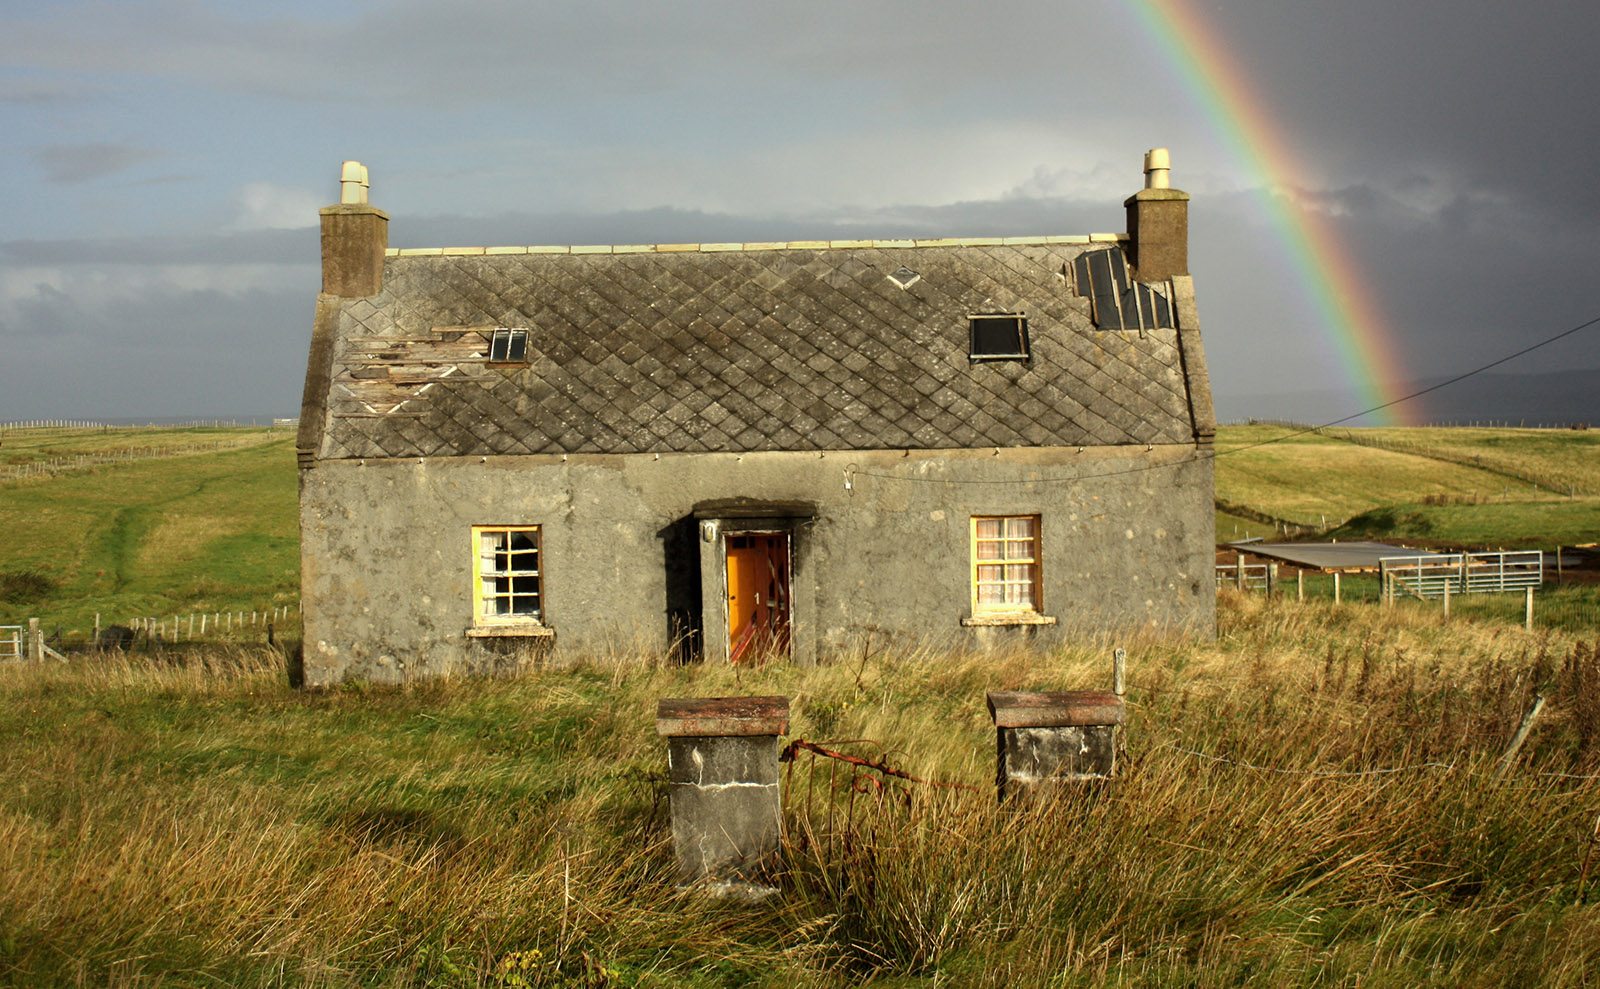 Isle of Lewis, Summer Thrillers, Historic Pools, Card Catalogs & More: Endnotes 03 June